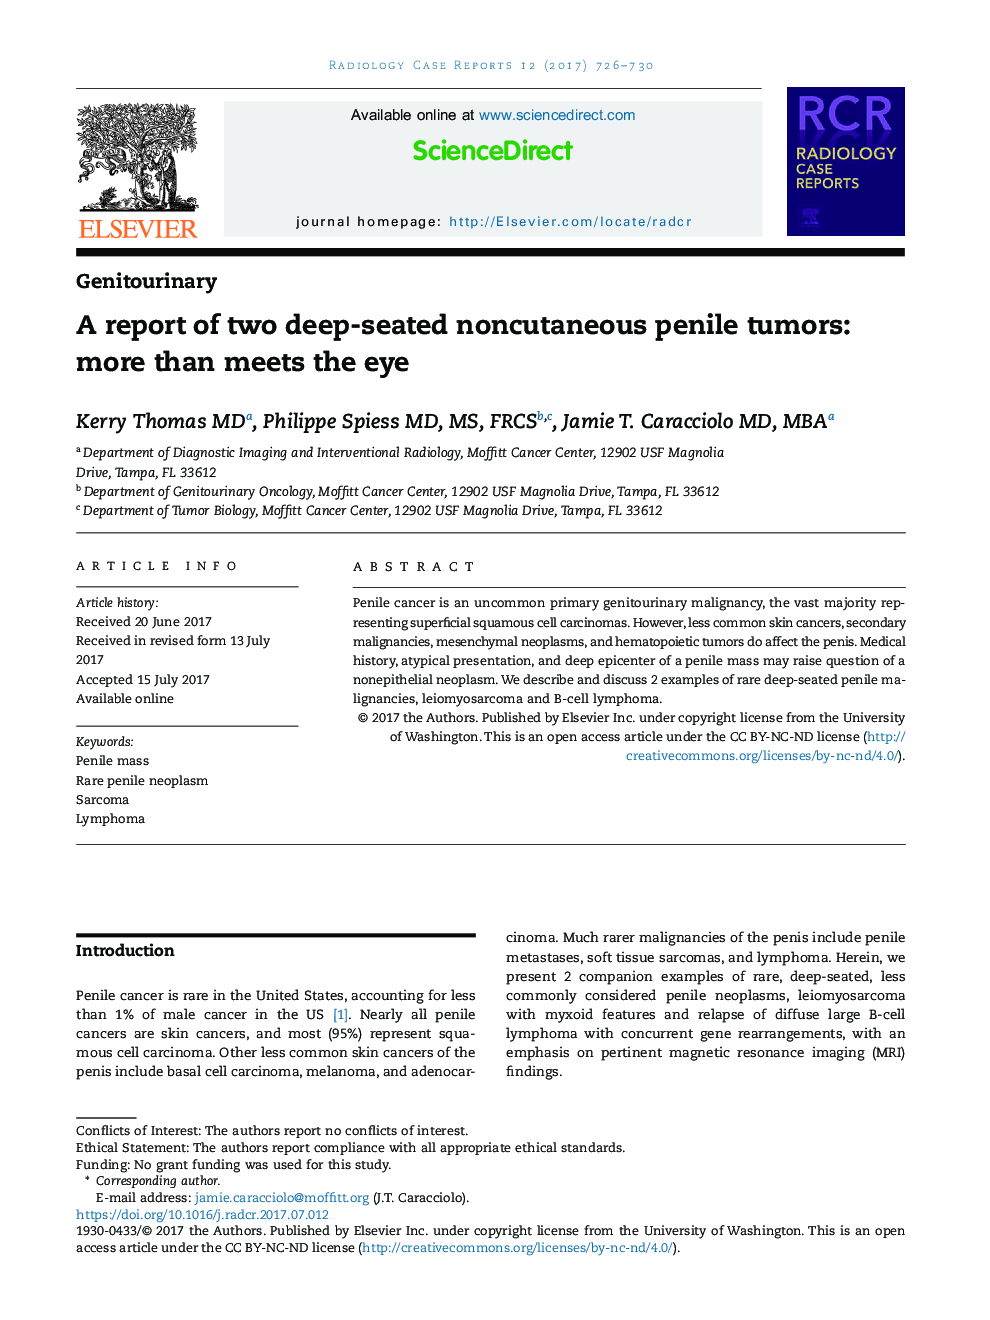 A report of two deep-seated noncutaneous penile tumors: more than meets the eye